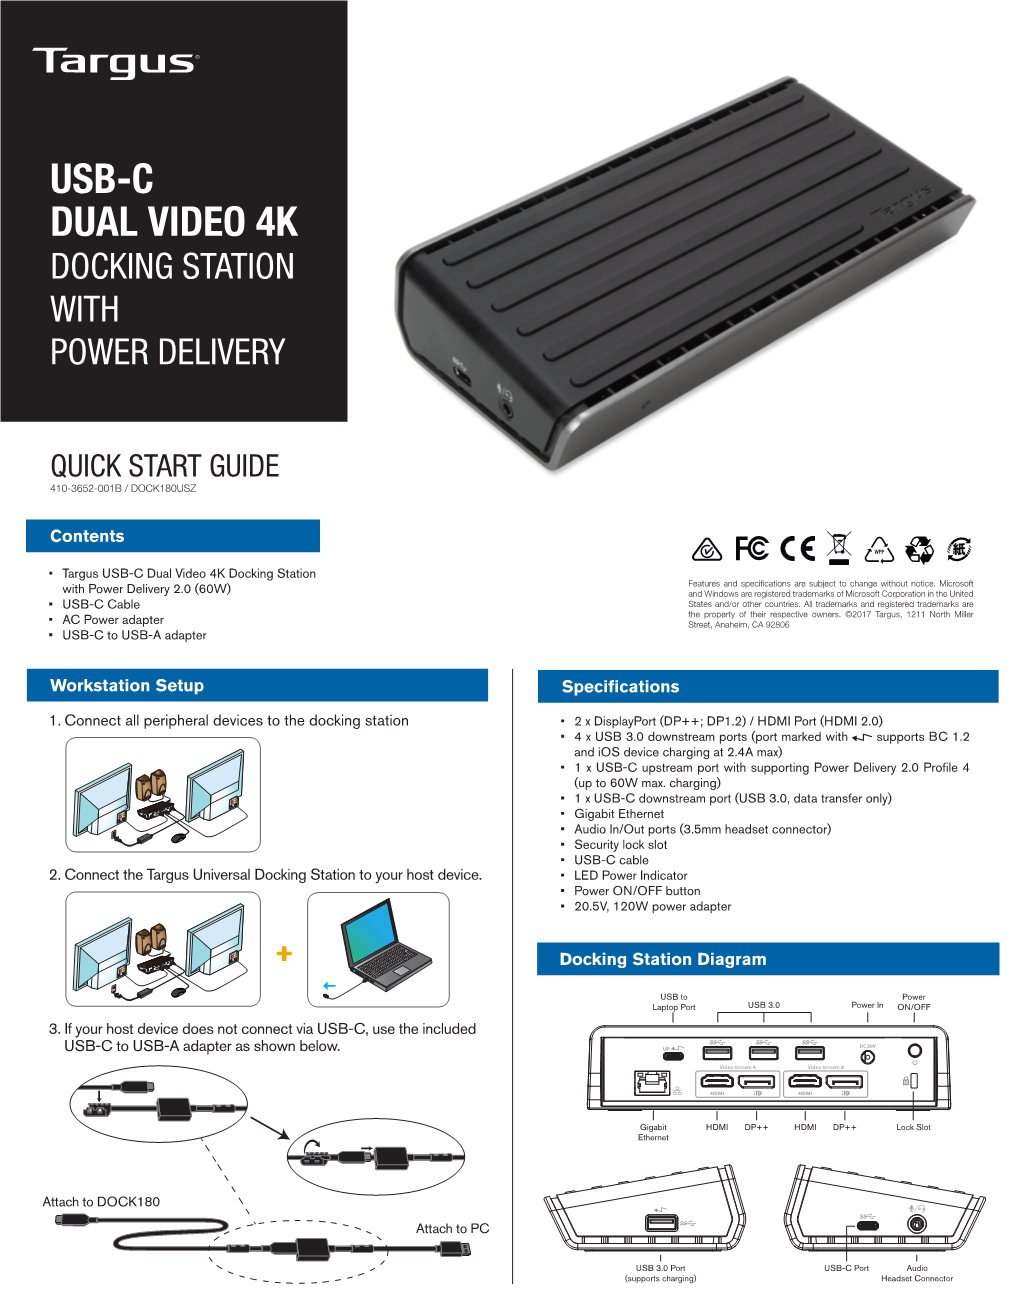 Usb-C Dual Video 4K Docking Station with Power Delivery